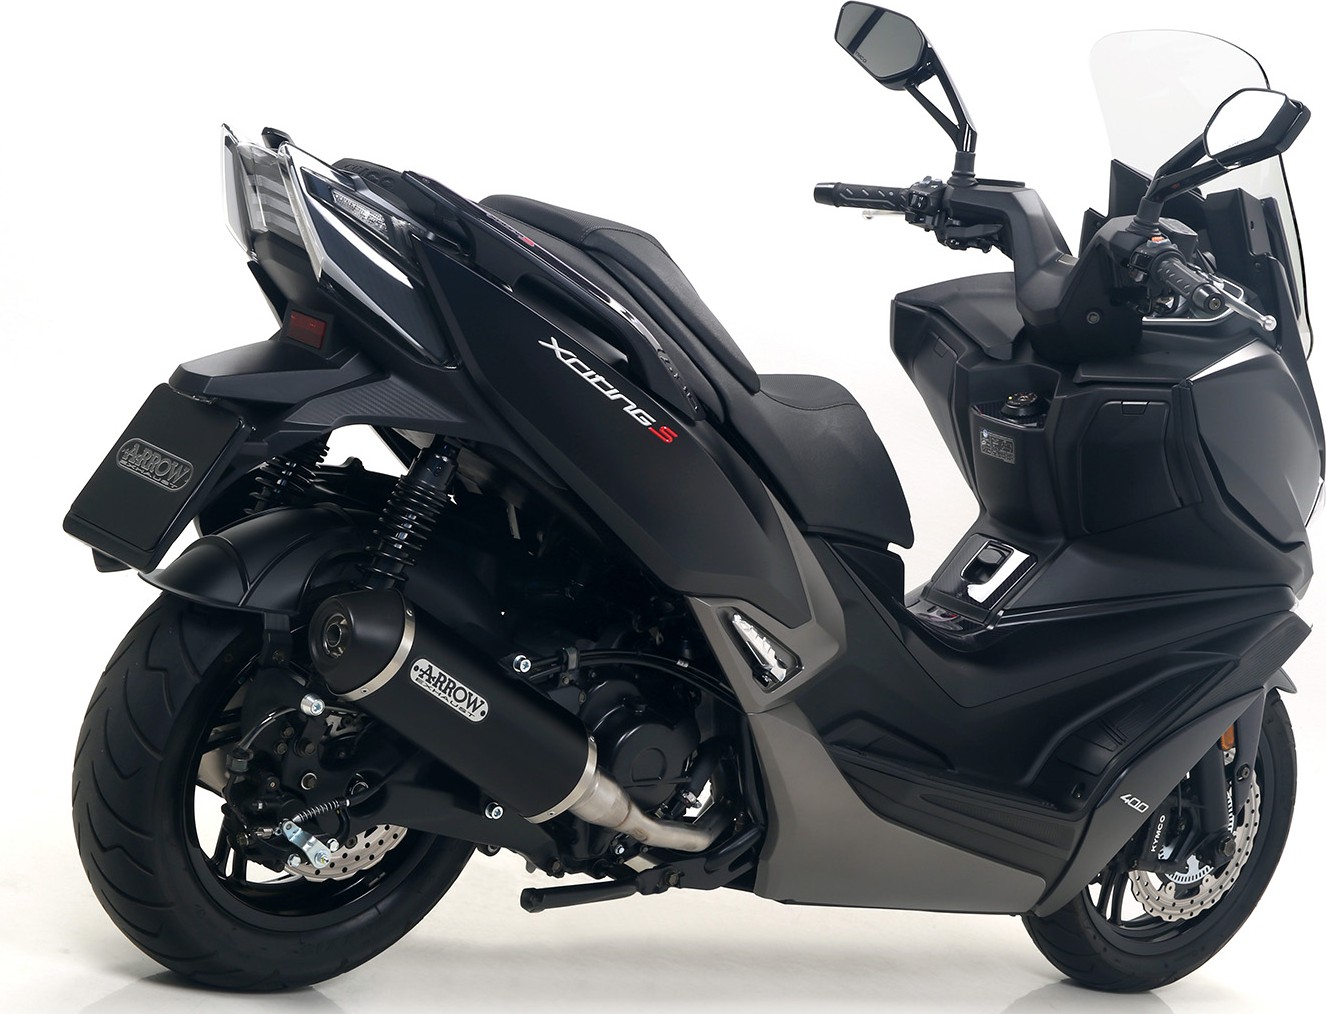  Kymco Xciting 400i S, Bj. 2019-2020 